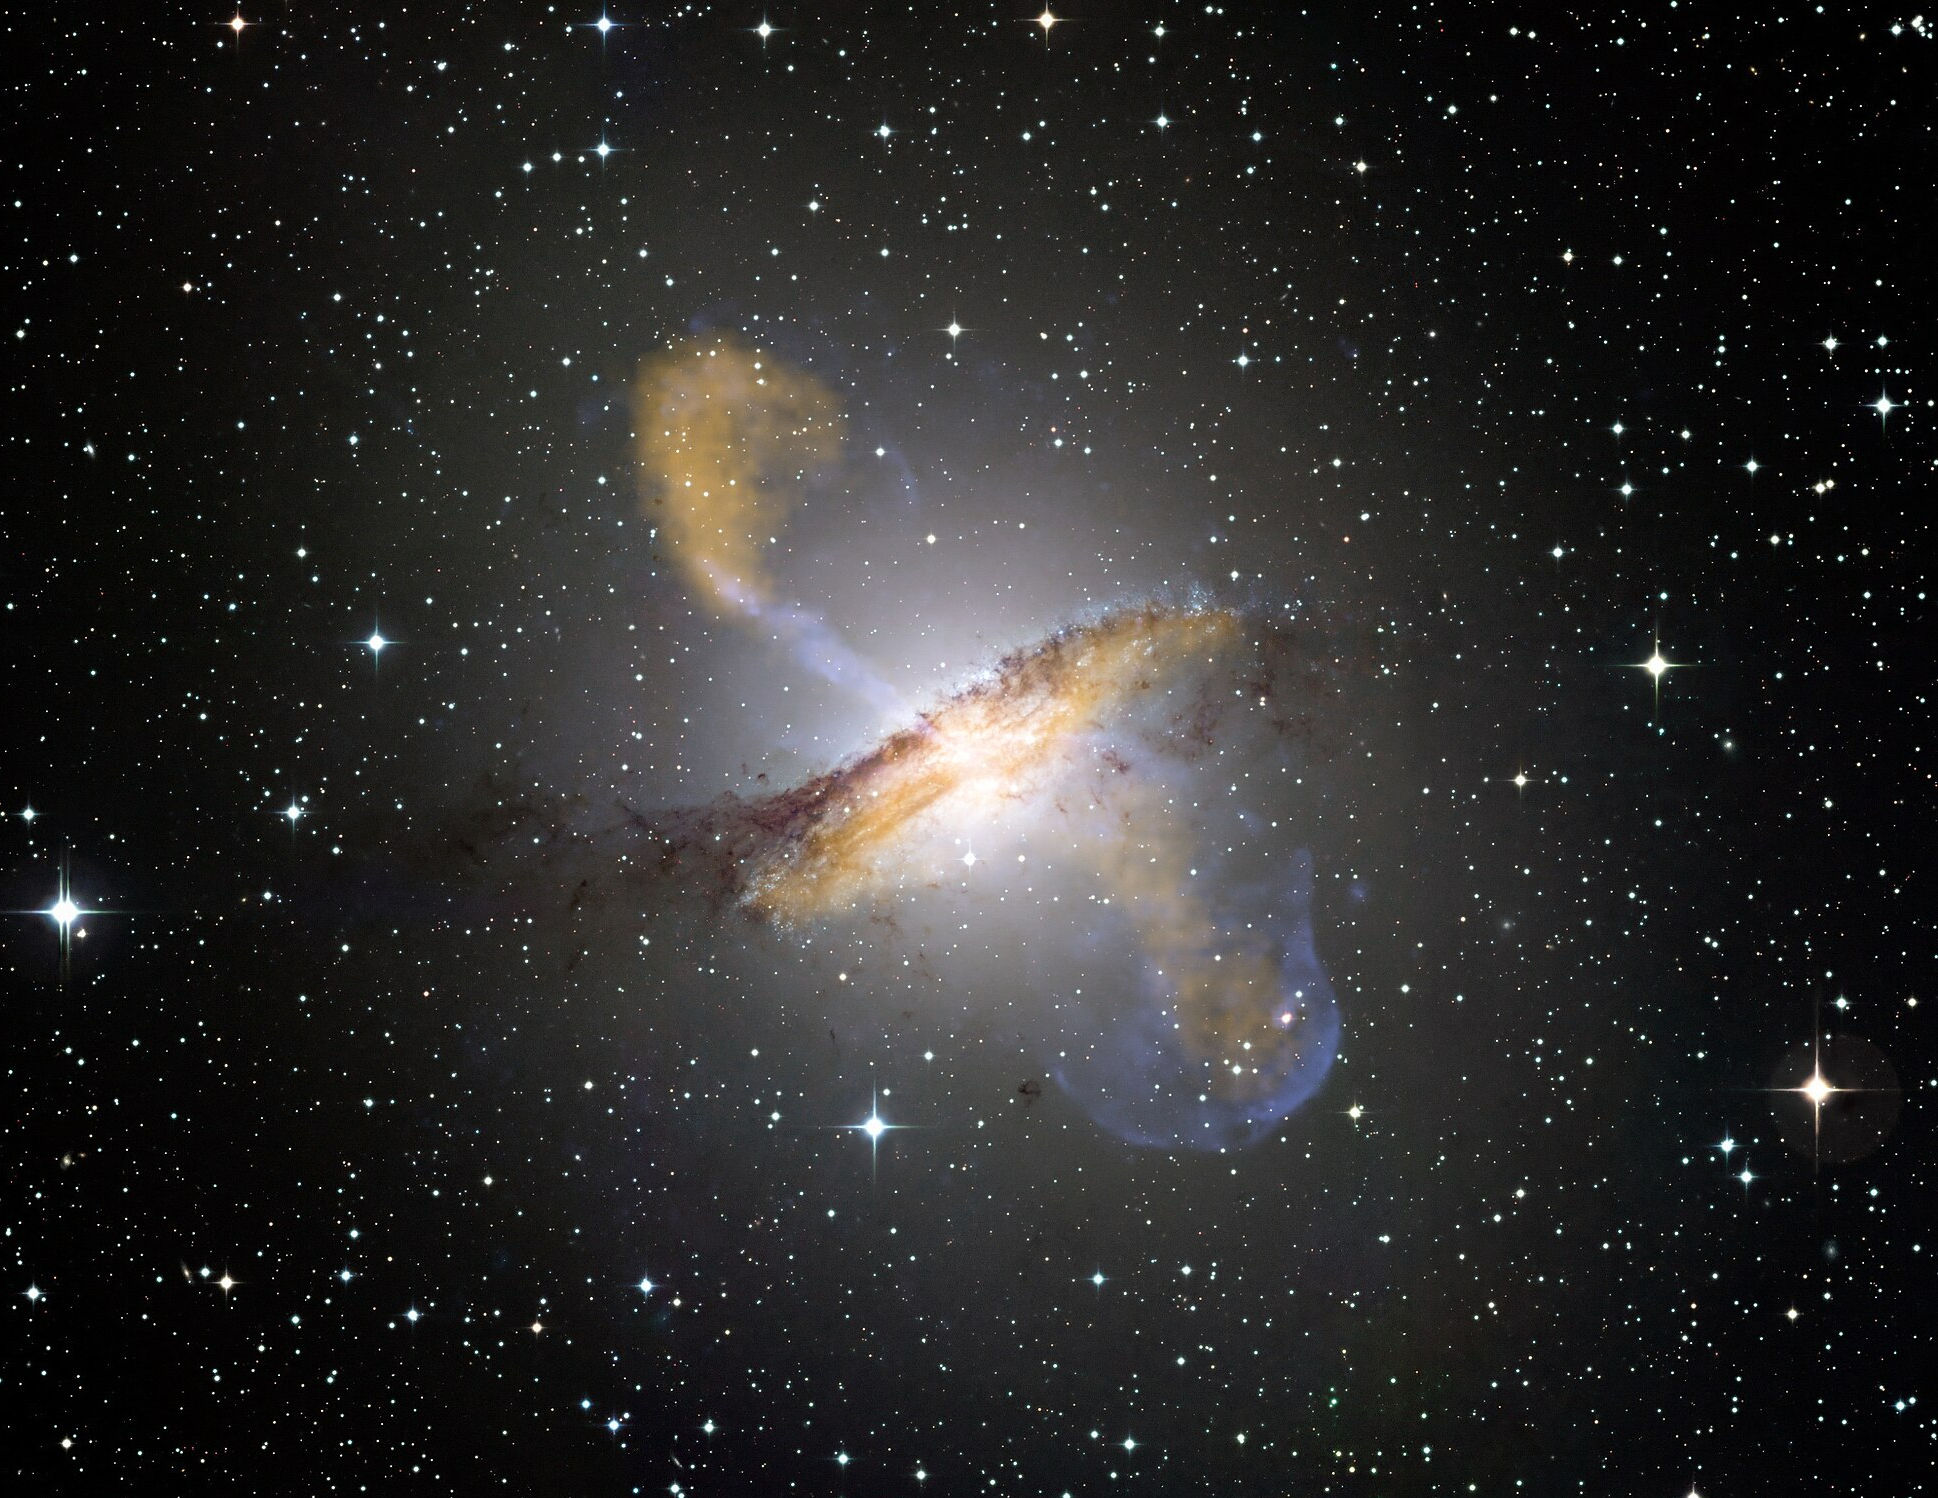 Shows an image of an active galaxy 